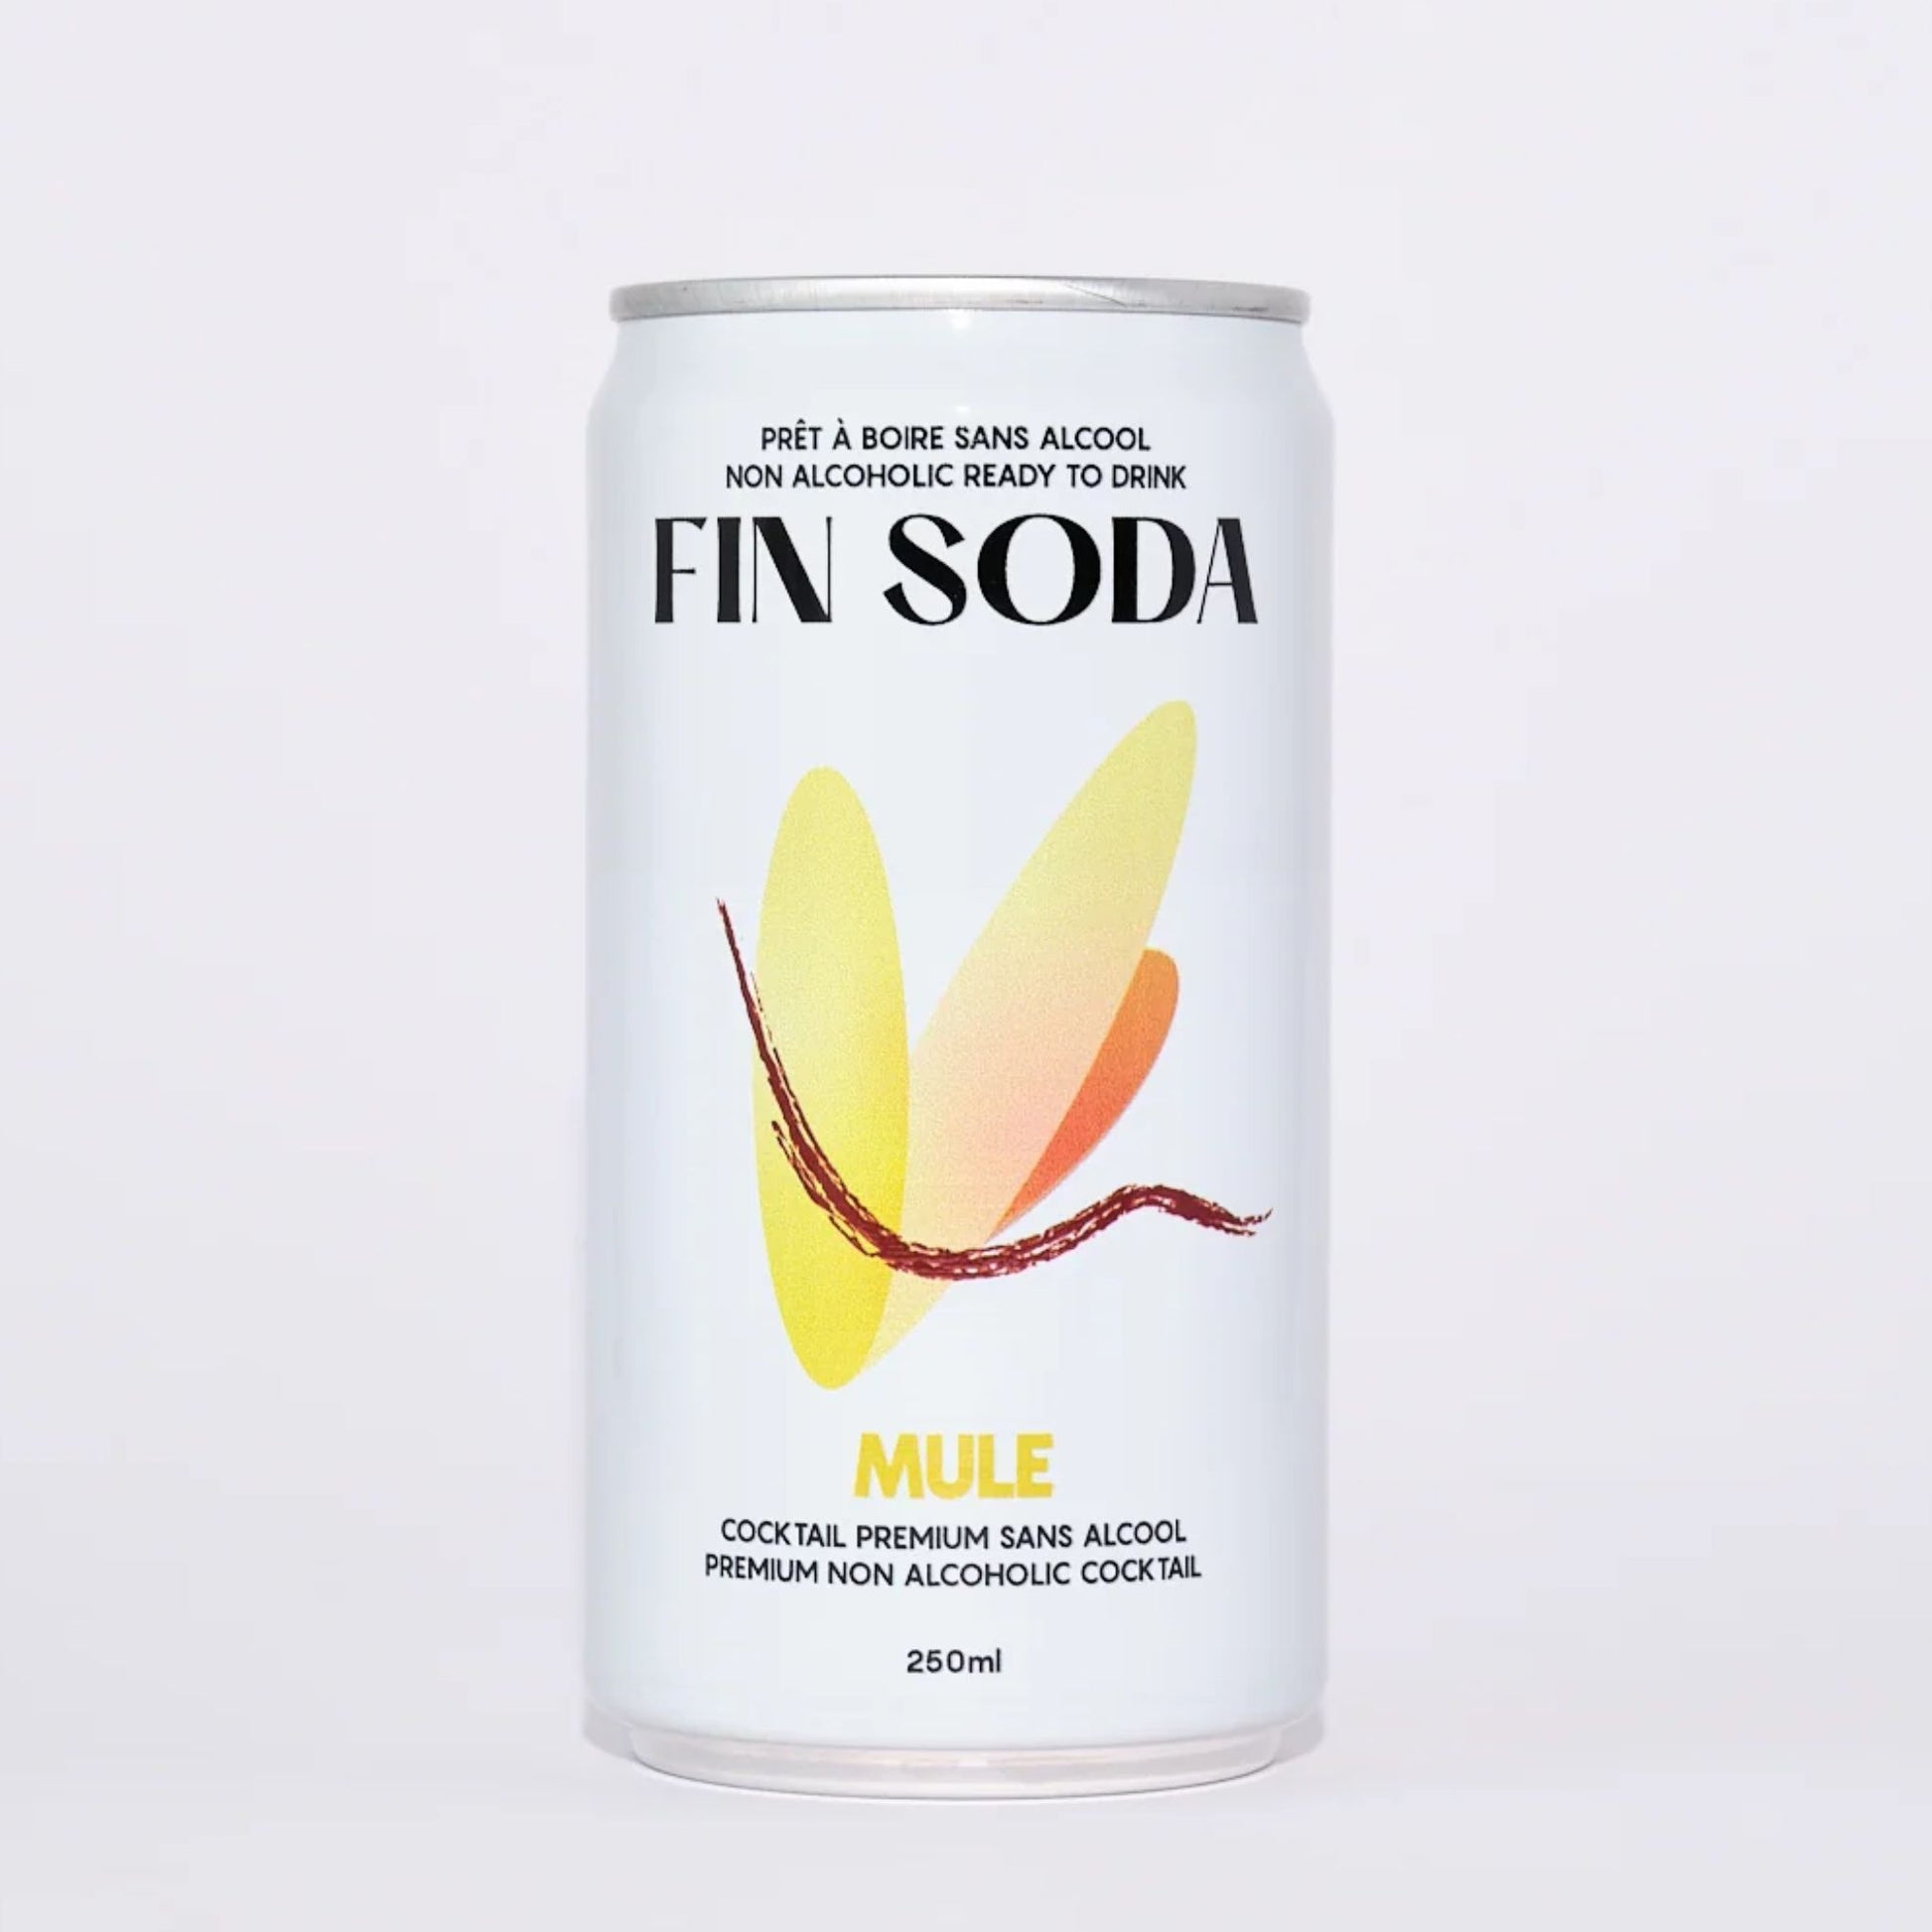 Fin Soda Non-Alcoholic Ready to Drink Mule is available at Knyota Non-Alcoholic Drinks.